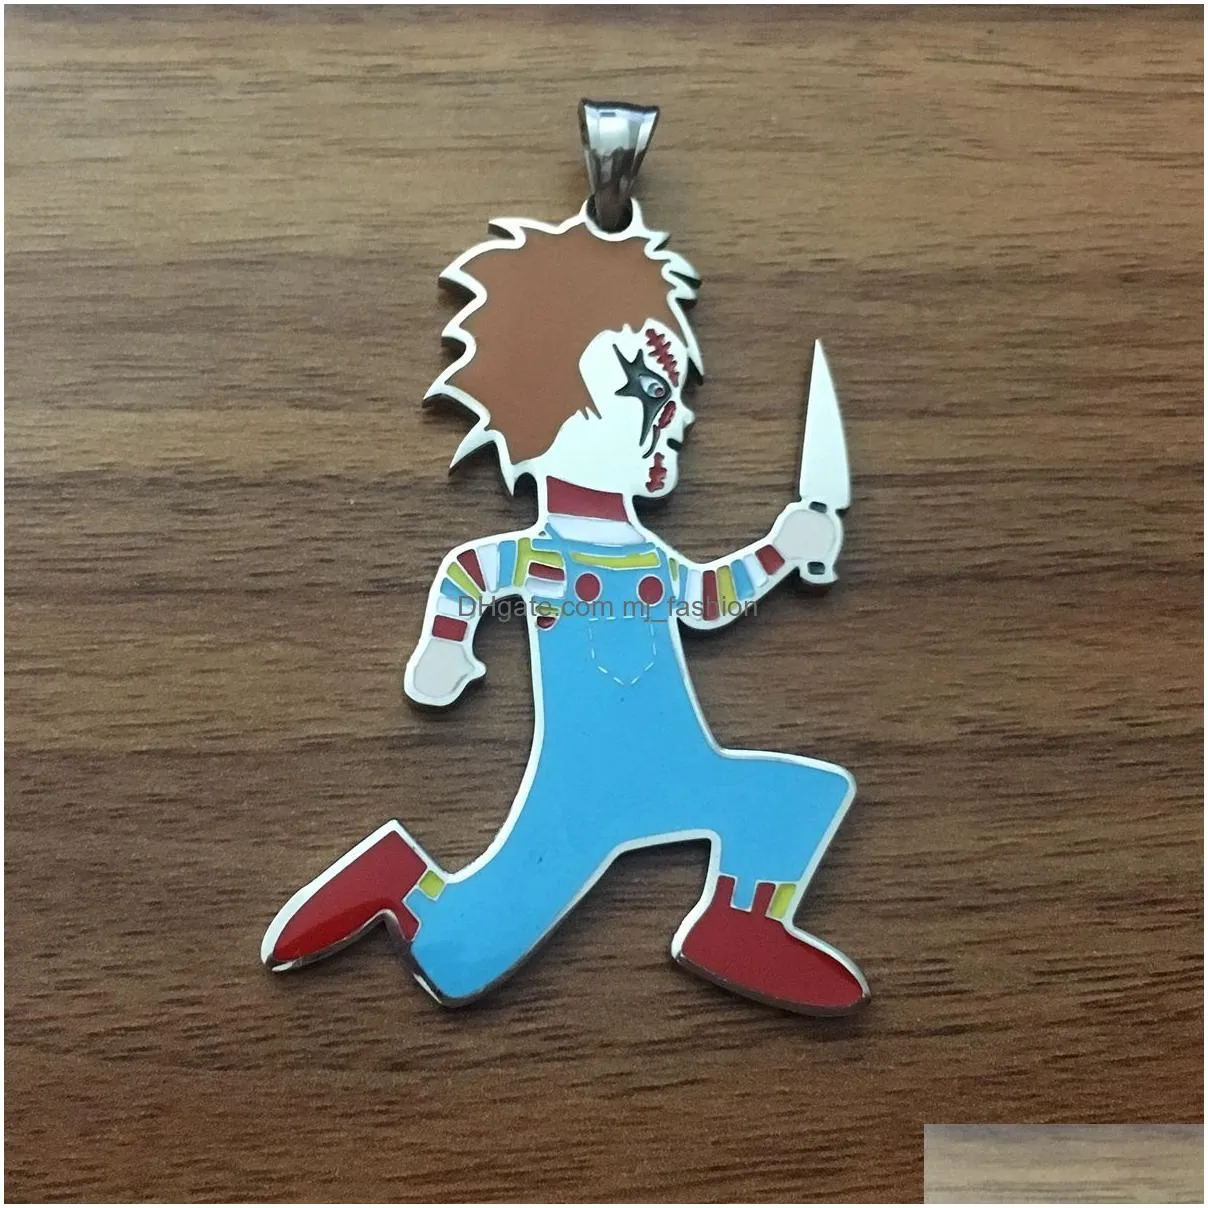 Pendant Necklaces Large Jalo Chucky Charm 2 1 In Icp Insane Clown Posse 30 Ball Necklace Stainless Steel High Polished Jewelry Accept Dhv6W